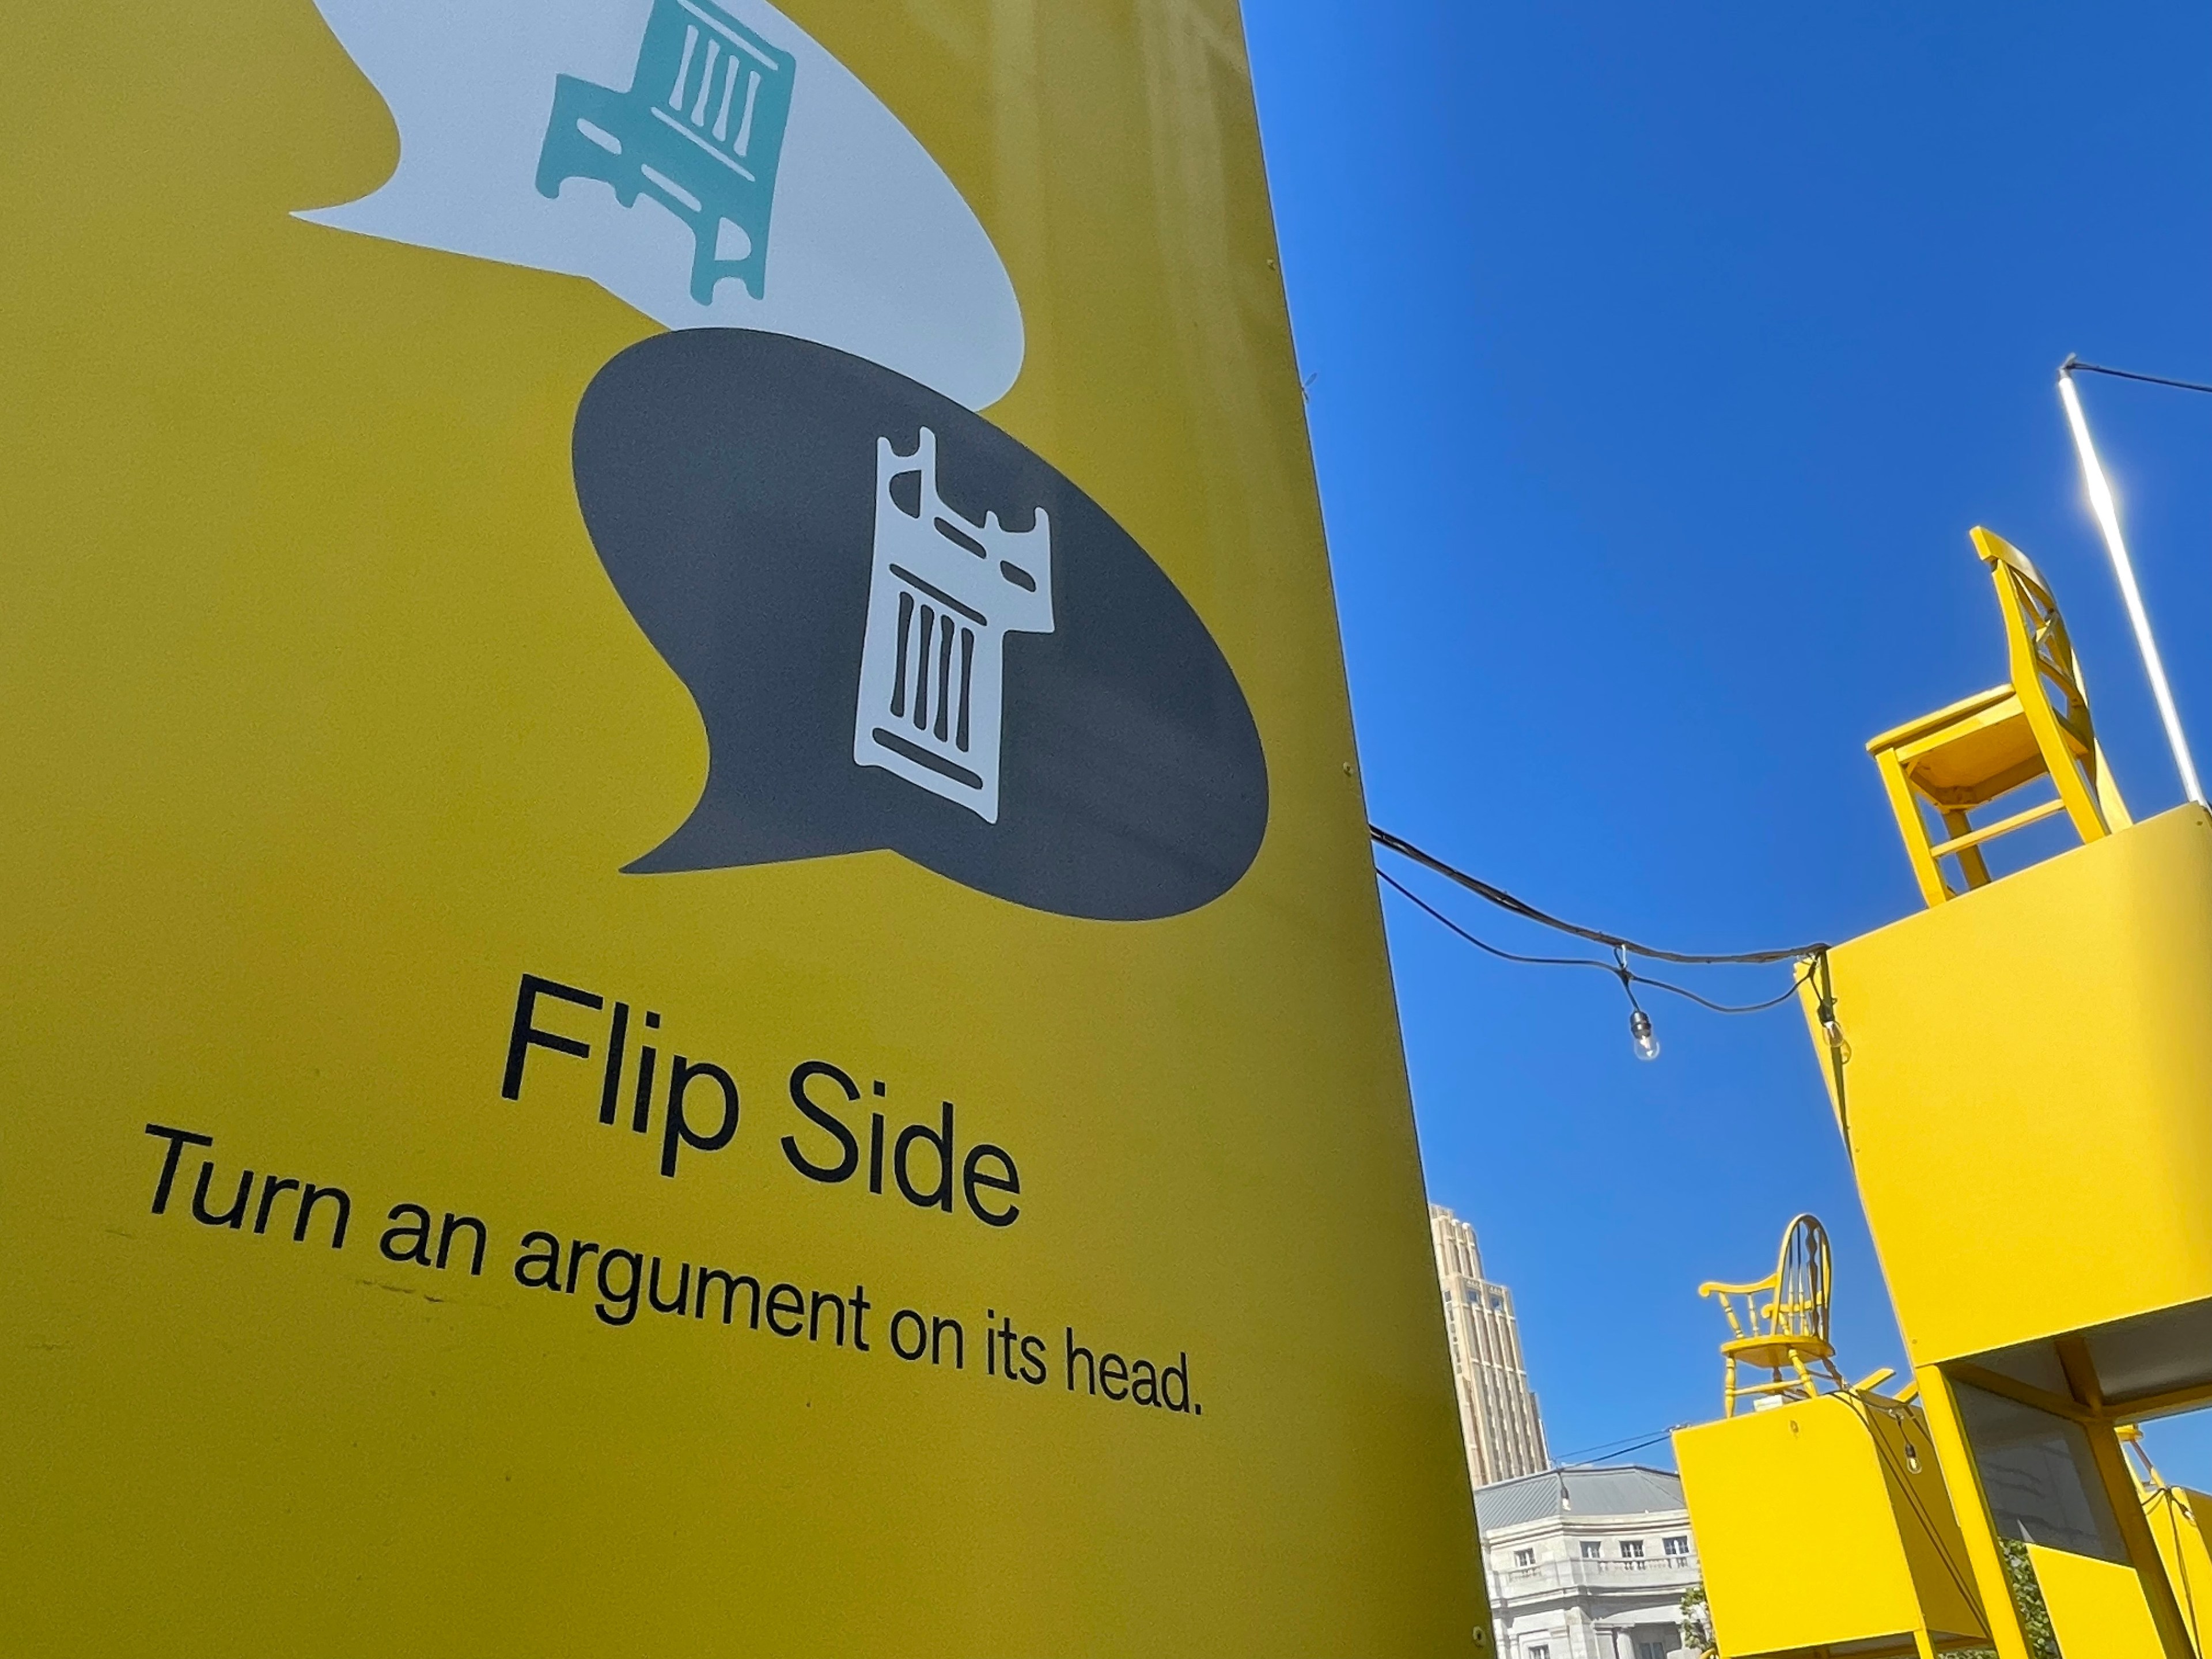 A yellow sign with text &quot;Flip Side Turn an argument on its head,&quot; two inverted speech bubbles with chair icons, under a blue sky.